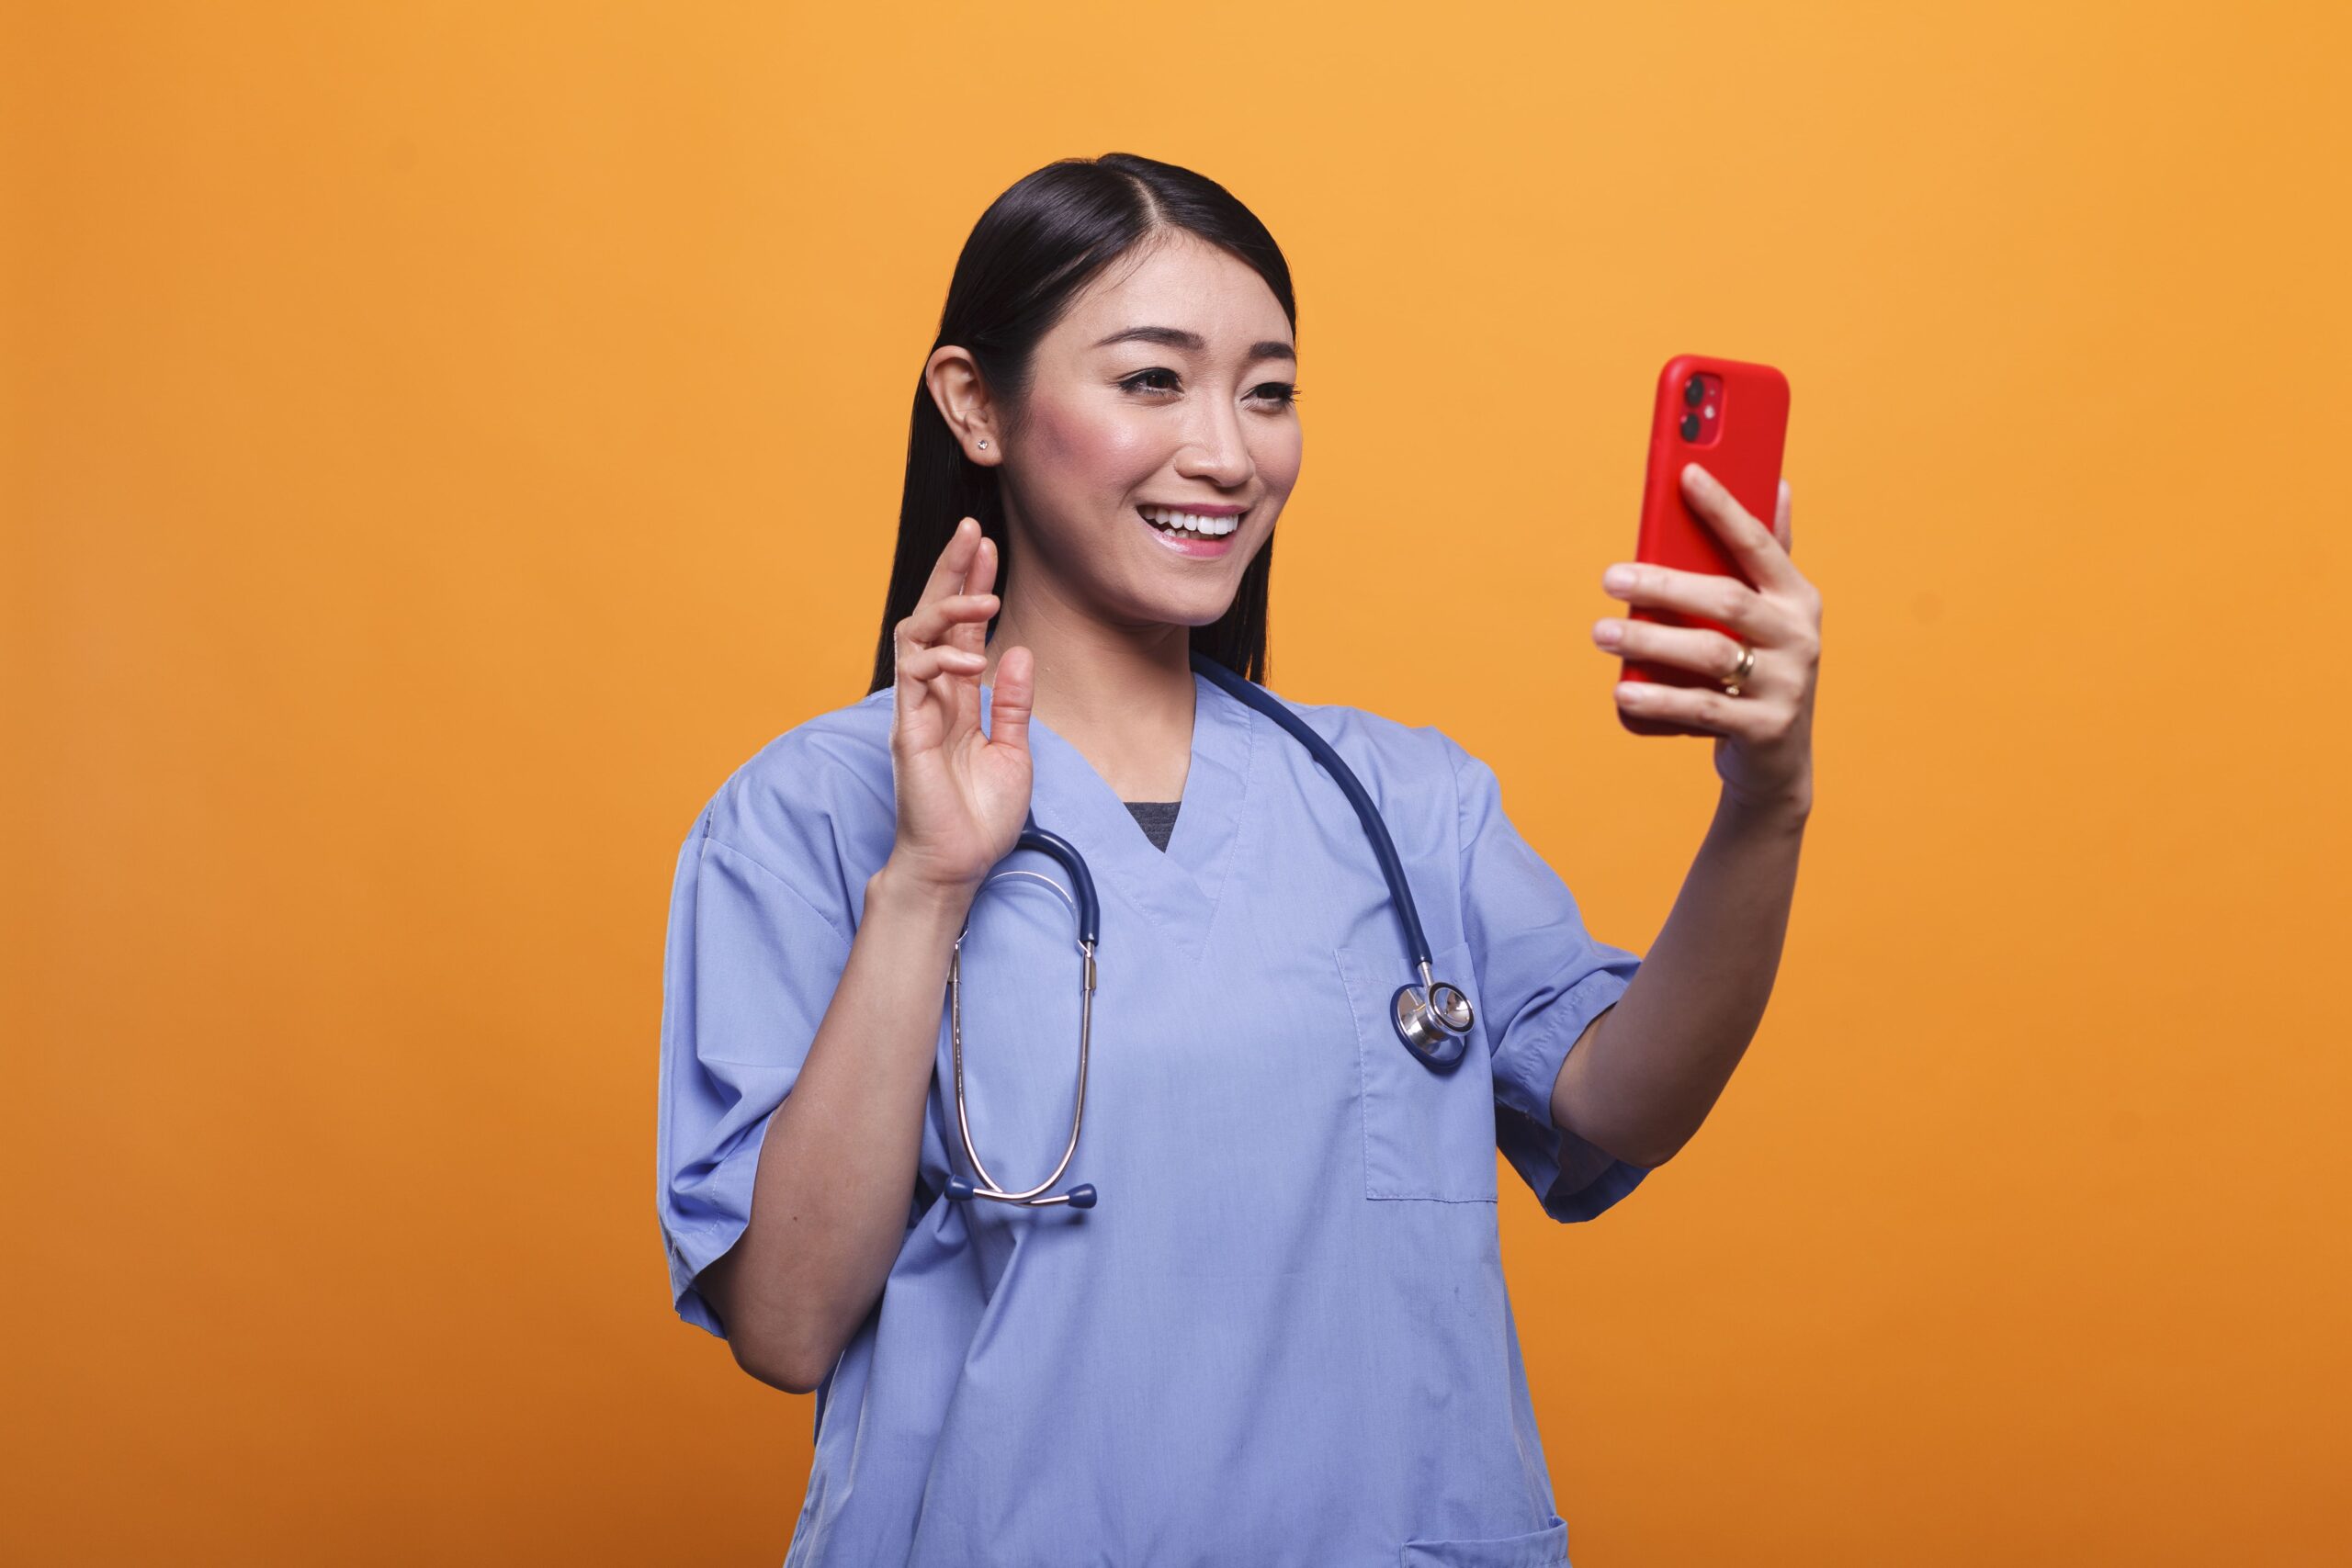 How is telemedicine changing healthcare scaled